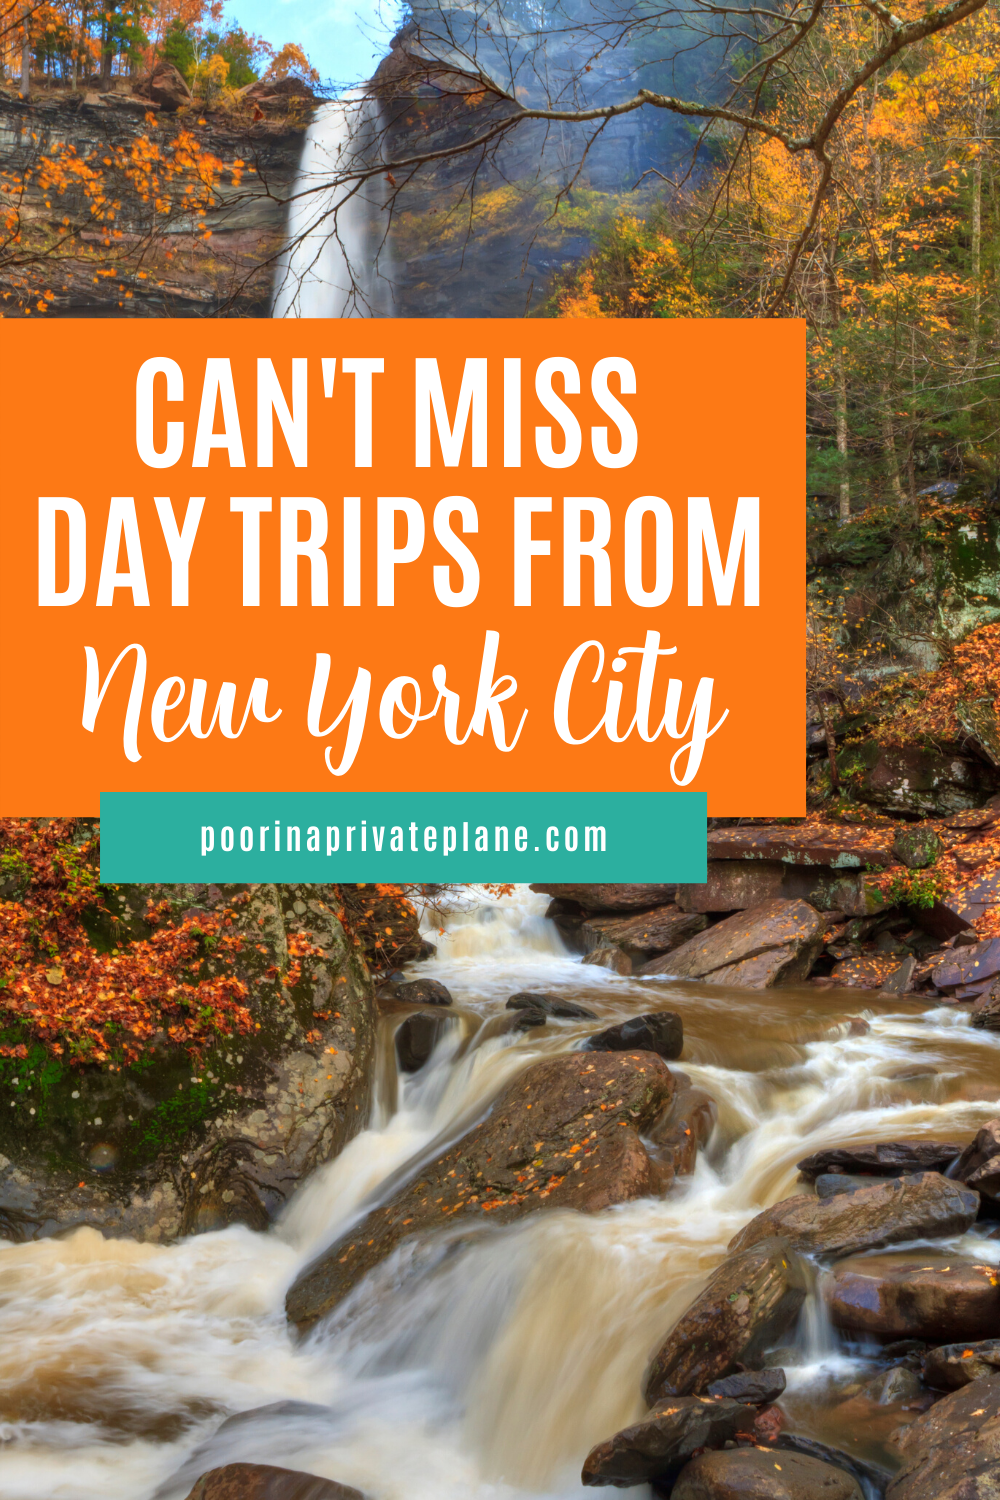 The Best Day Trips from NYC Day trip to nyc, Day trips, Trip